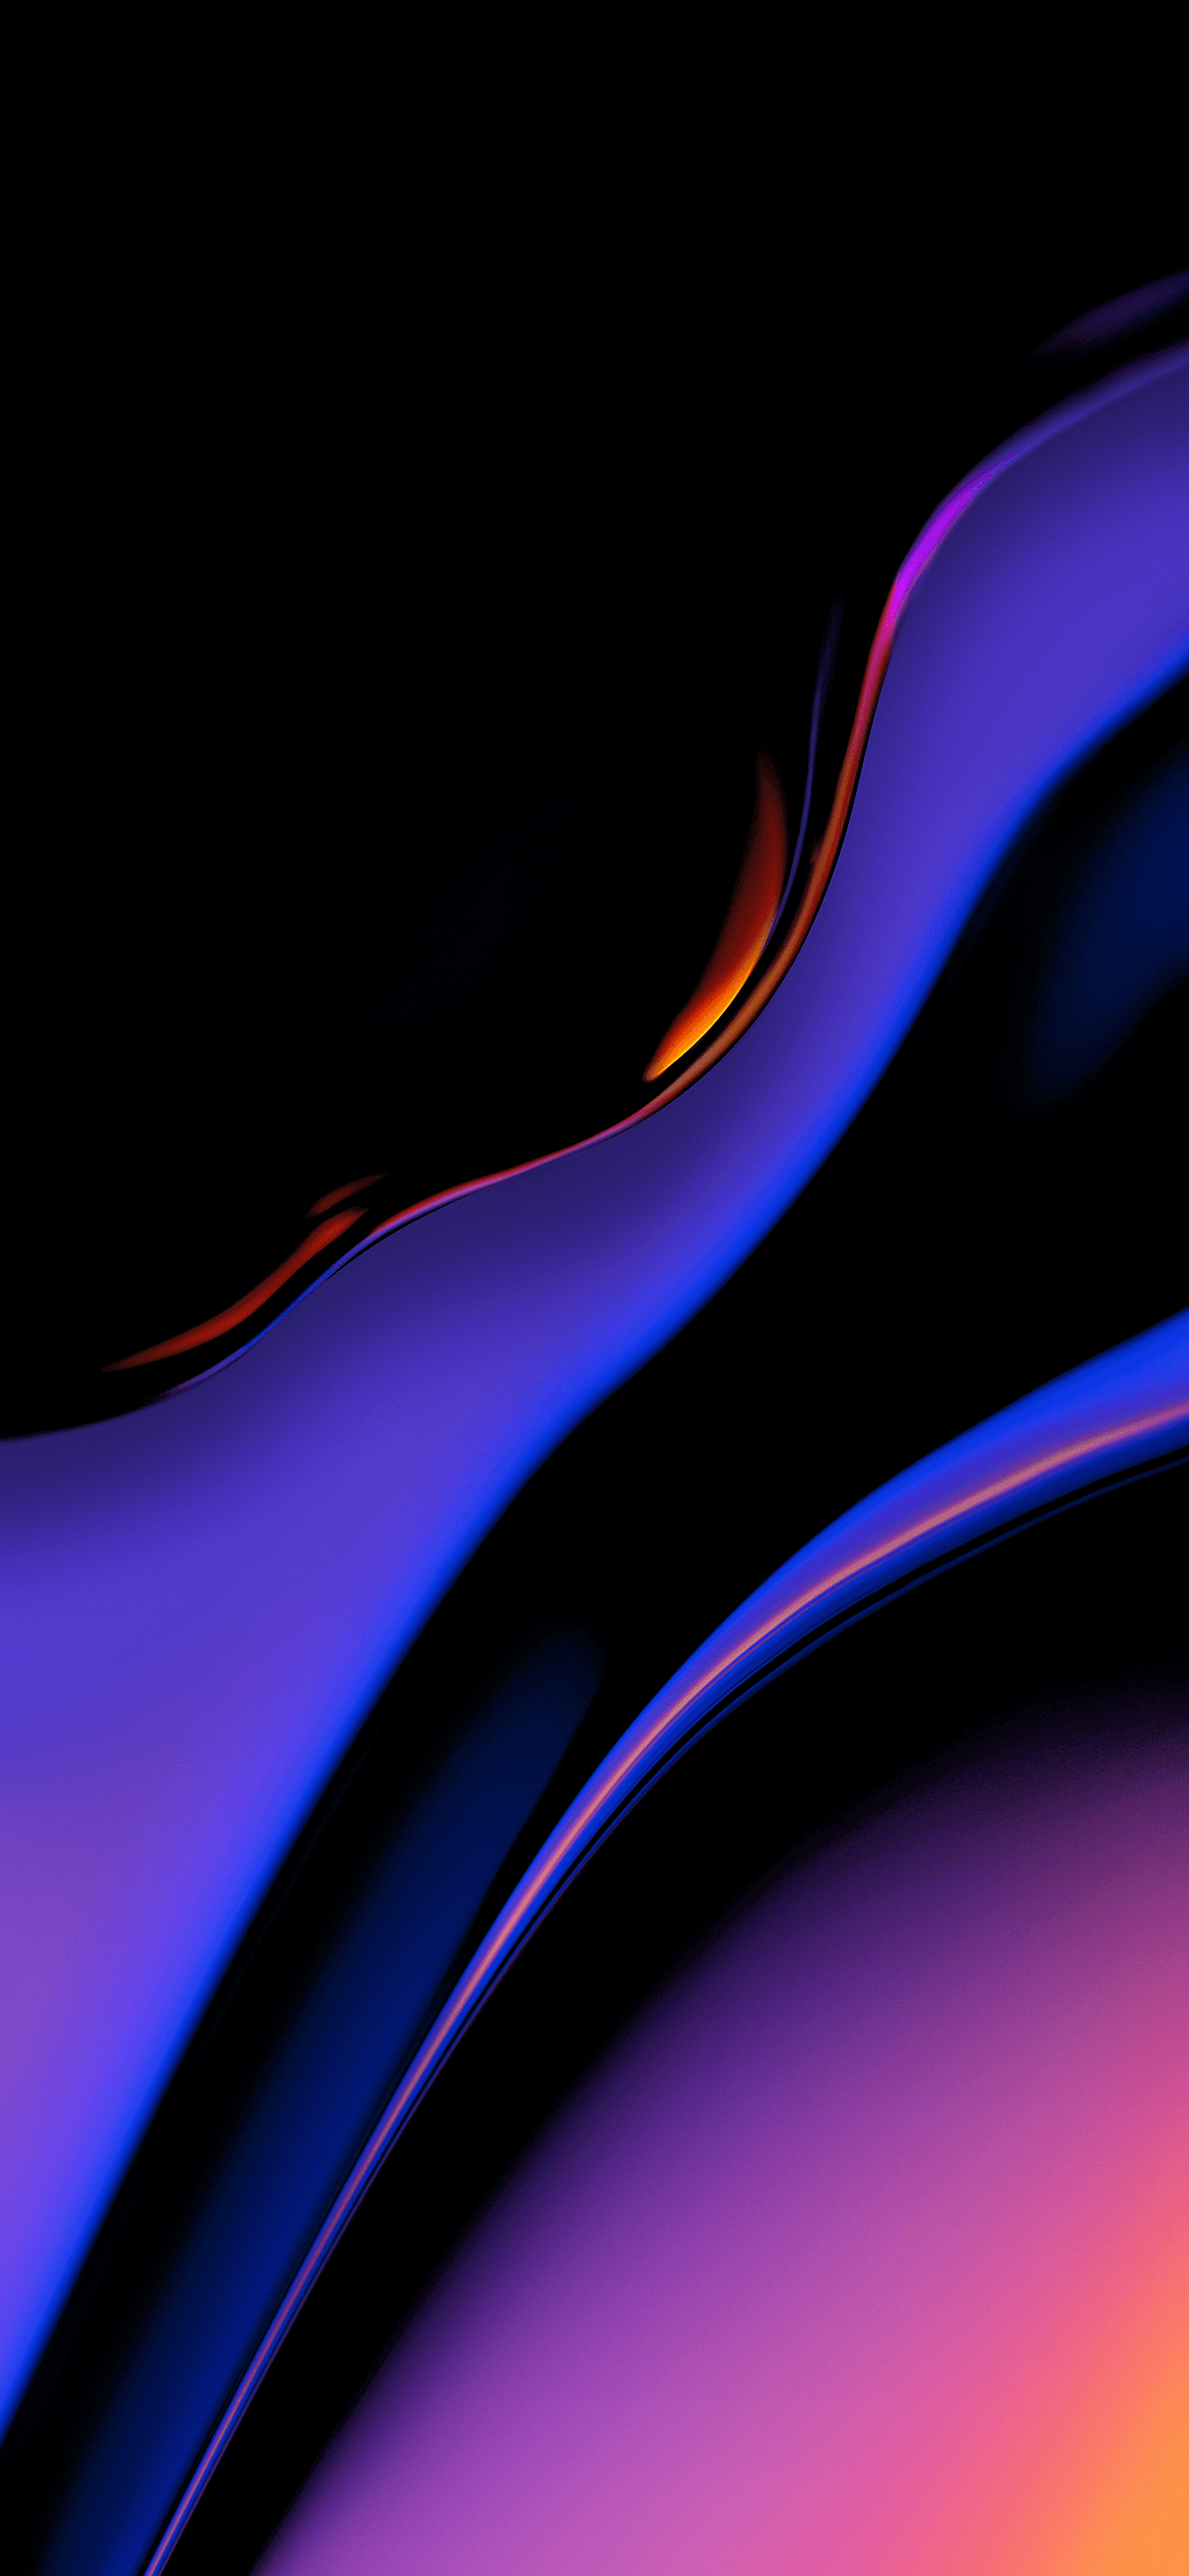 OnePlus 6T Wallpaper Amoled Ified [2160x4680]